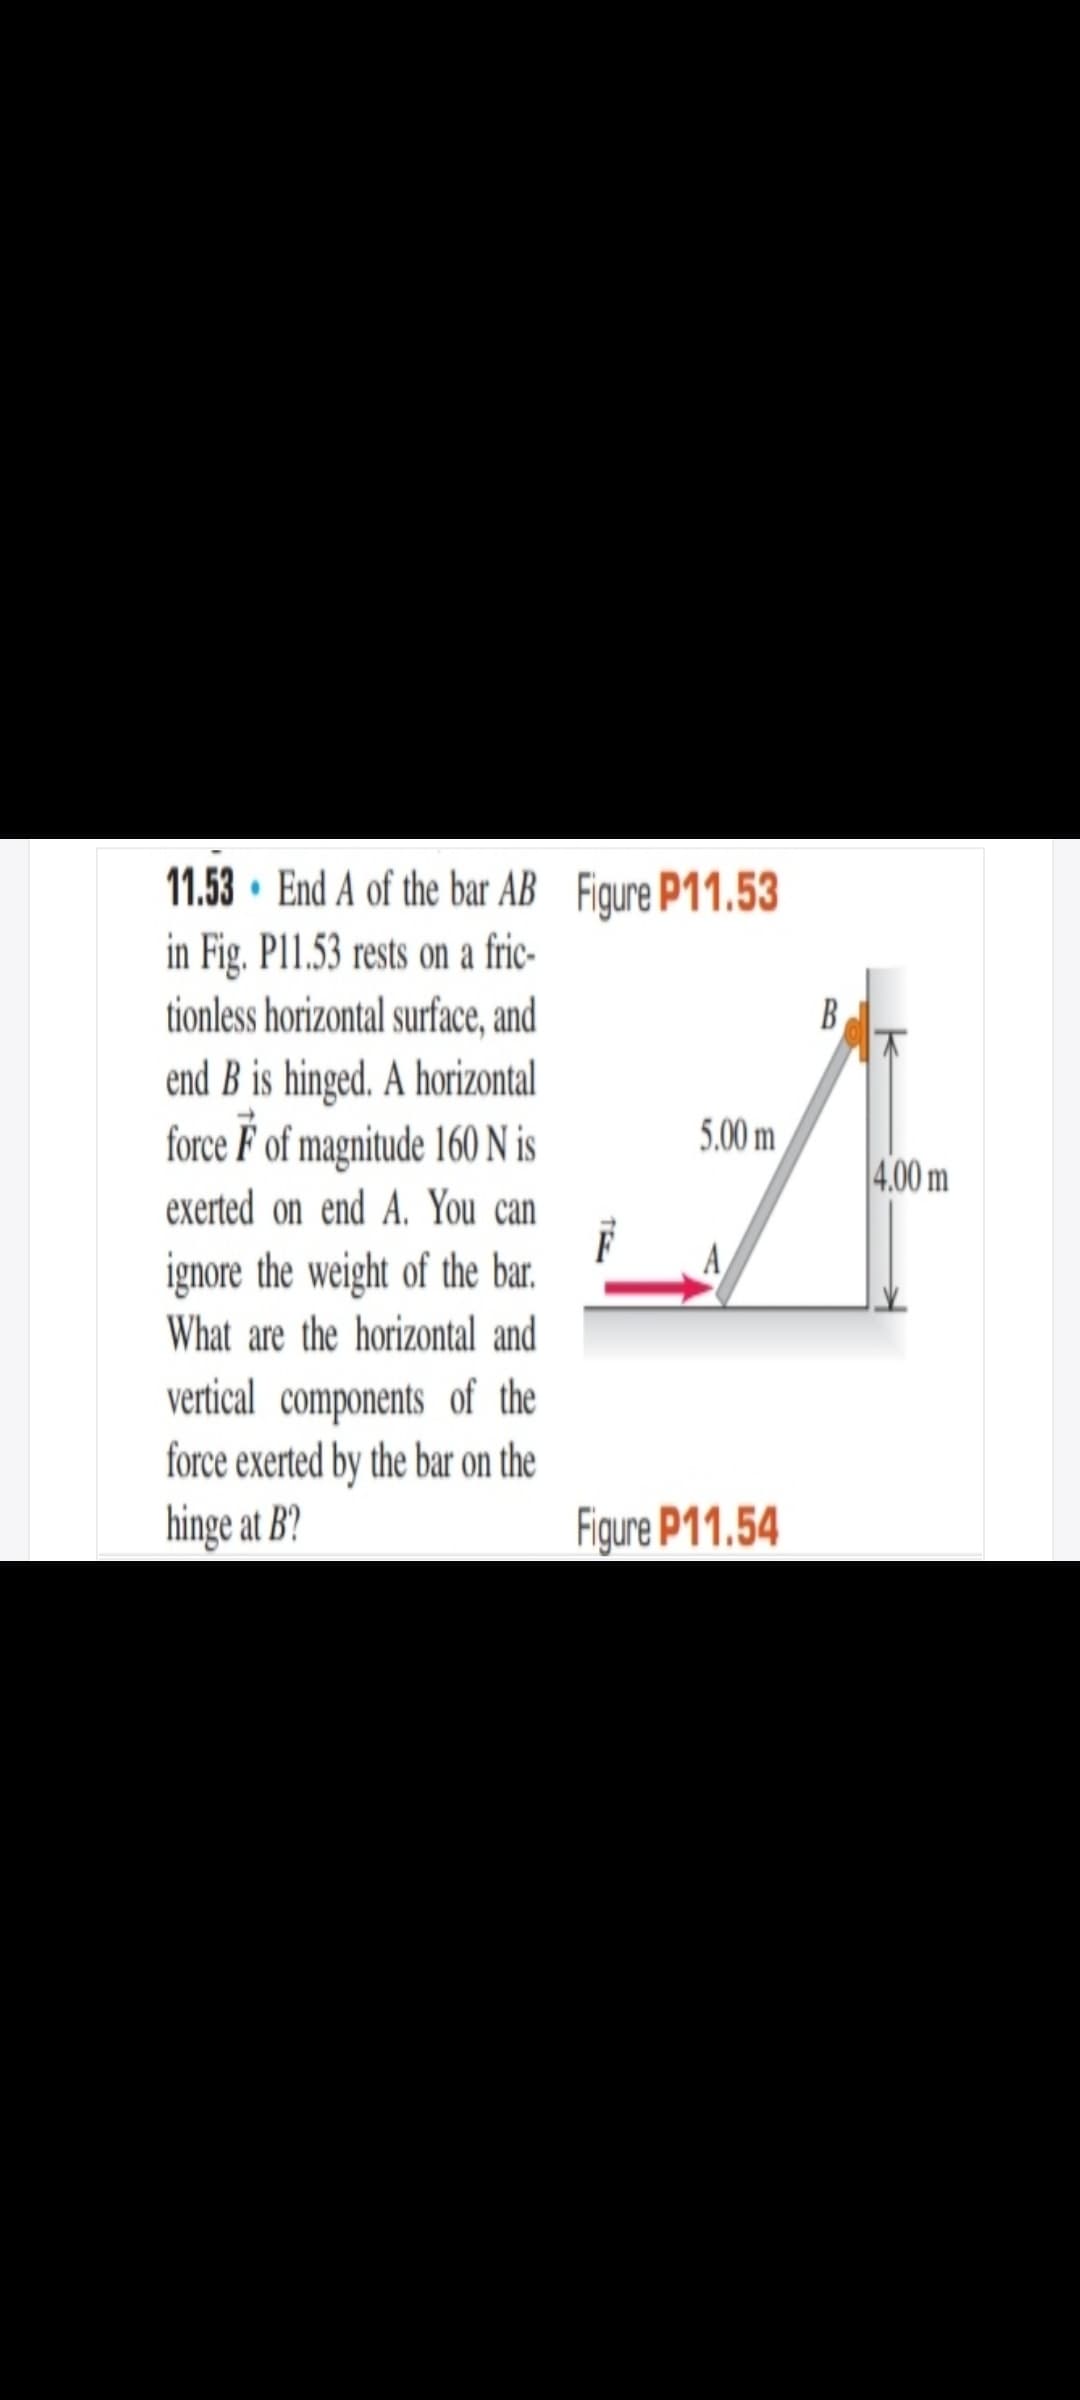 11.53 · End A of the bar AB Figure P11.53
in Fig. P11.53 rests on a fric-
tionless horizontal surface, and
B
end B is hinged. A horizontal
force F of magnitude 160 N is
exerted on end A. You can
5.00 m
4.00 m
A
ignore the weight of the bar.
What are the horizontal and
vertical components of the
force exerted by the bar on the
hinge at B?
Figure P11.54
